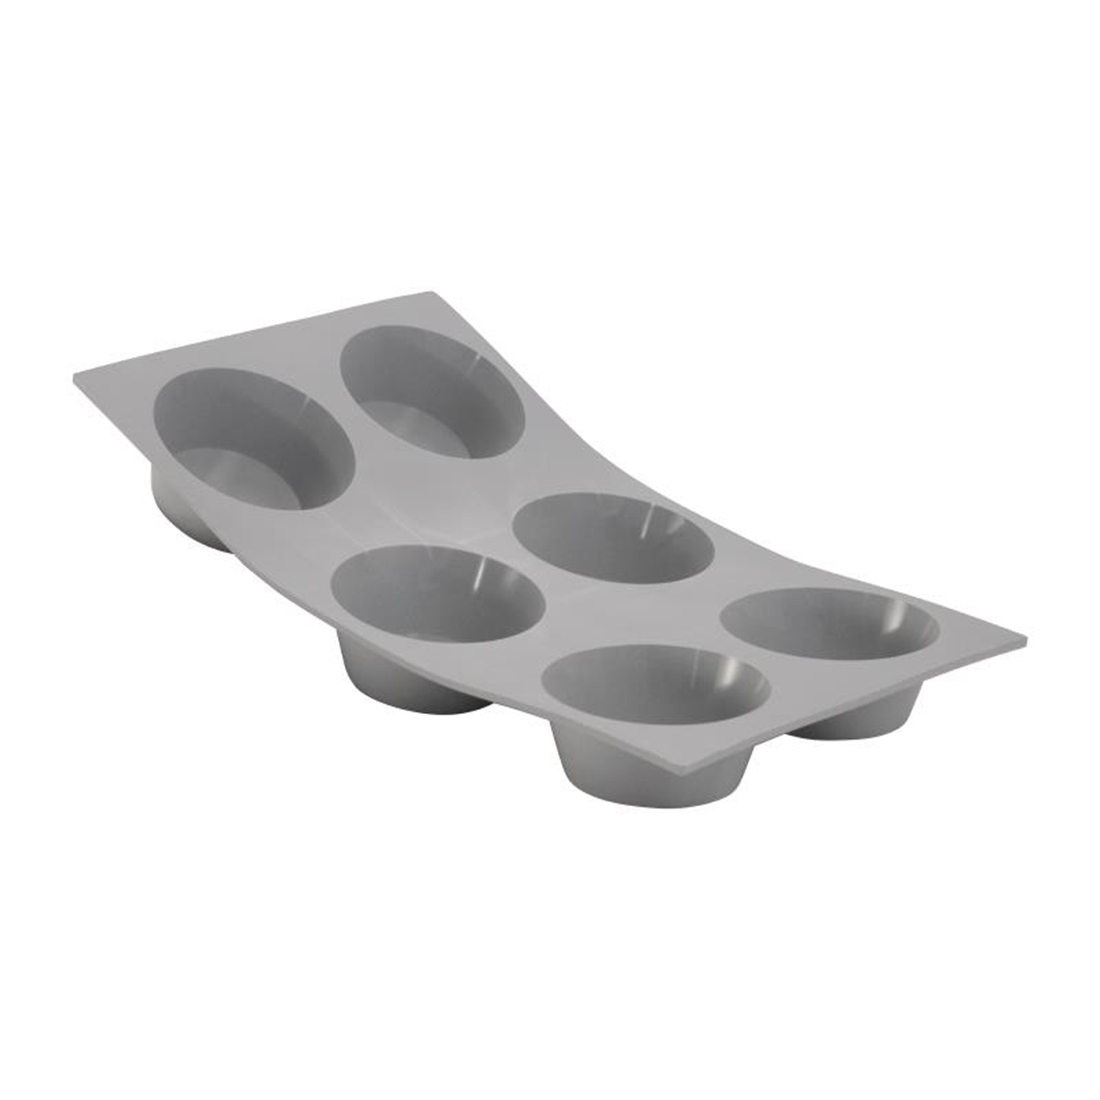 DeBuyer Elastomoule Silicone Mould 6 Muffins 95ml Each